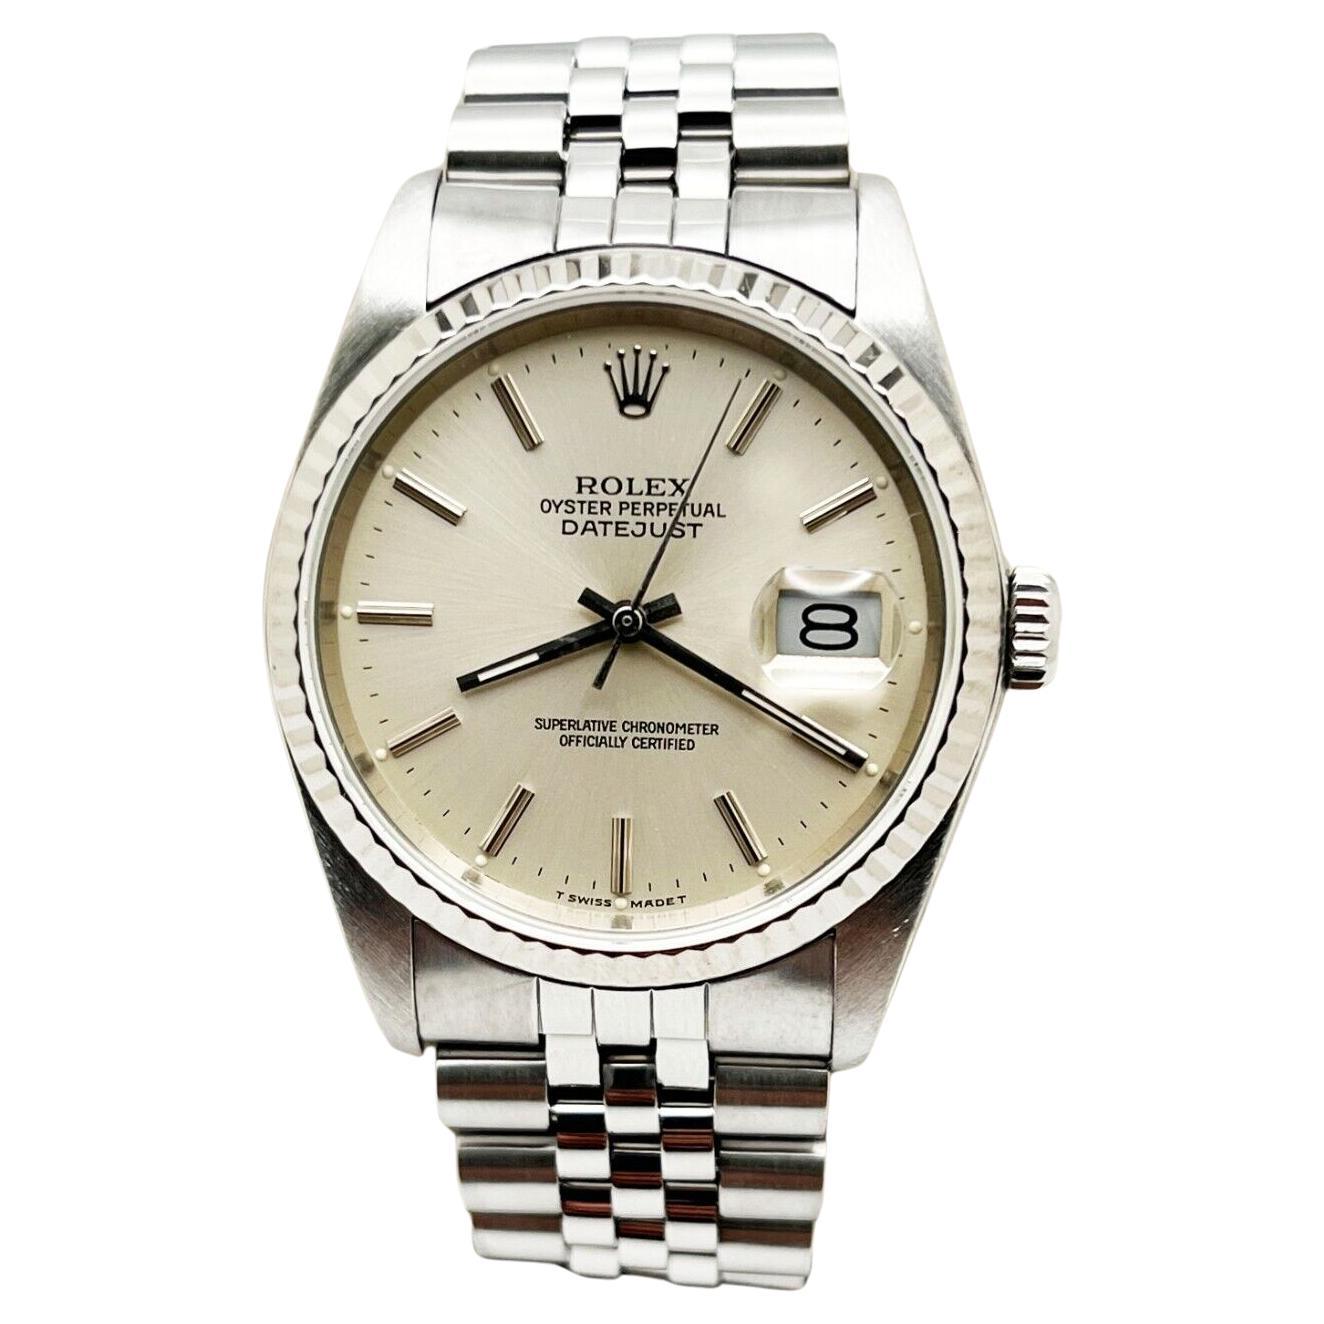 Rolex 16234 Datejust Silver Dial Stainless Steel For Sale